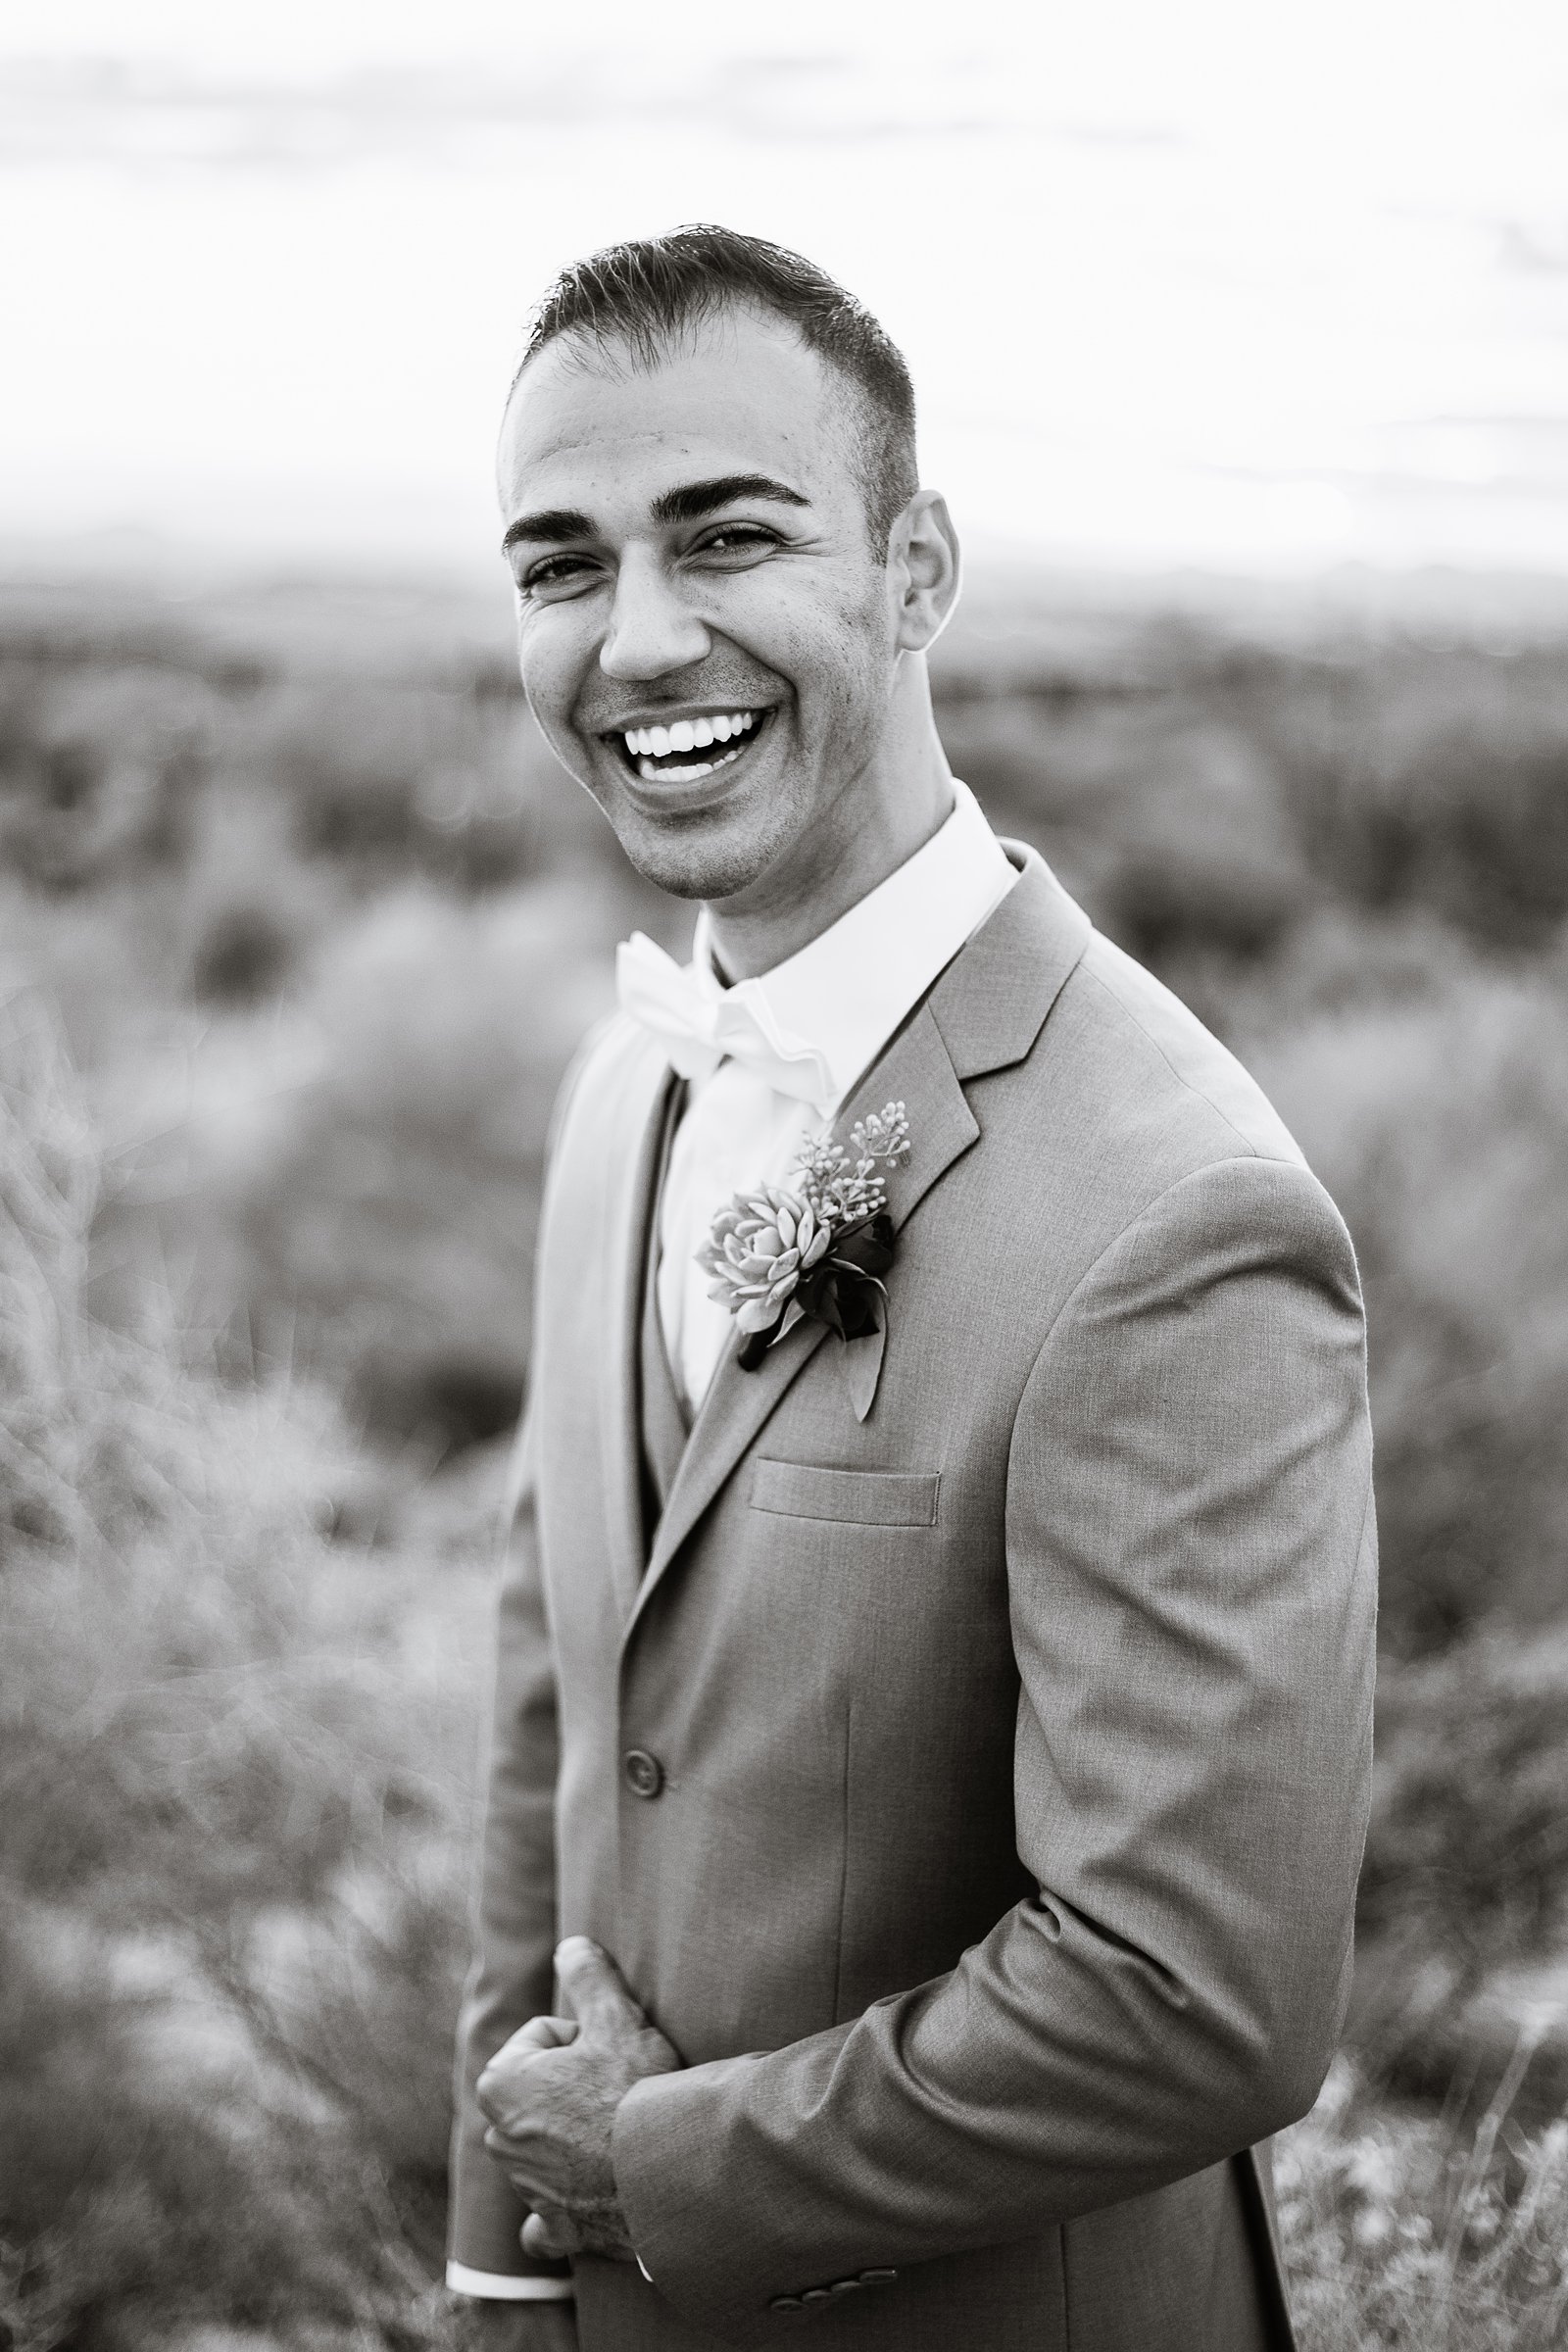 Groom laughing on his wedding day by PMA Photography.